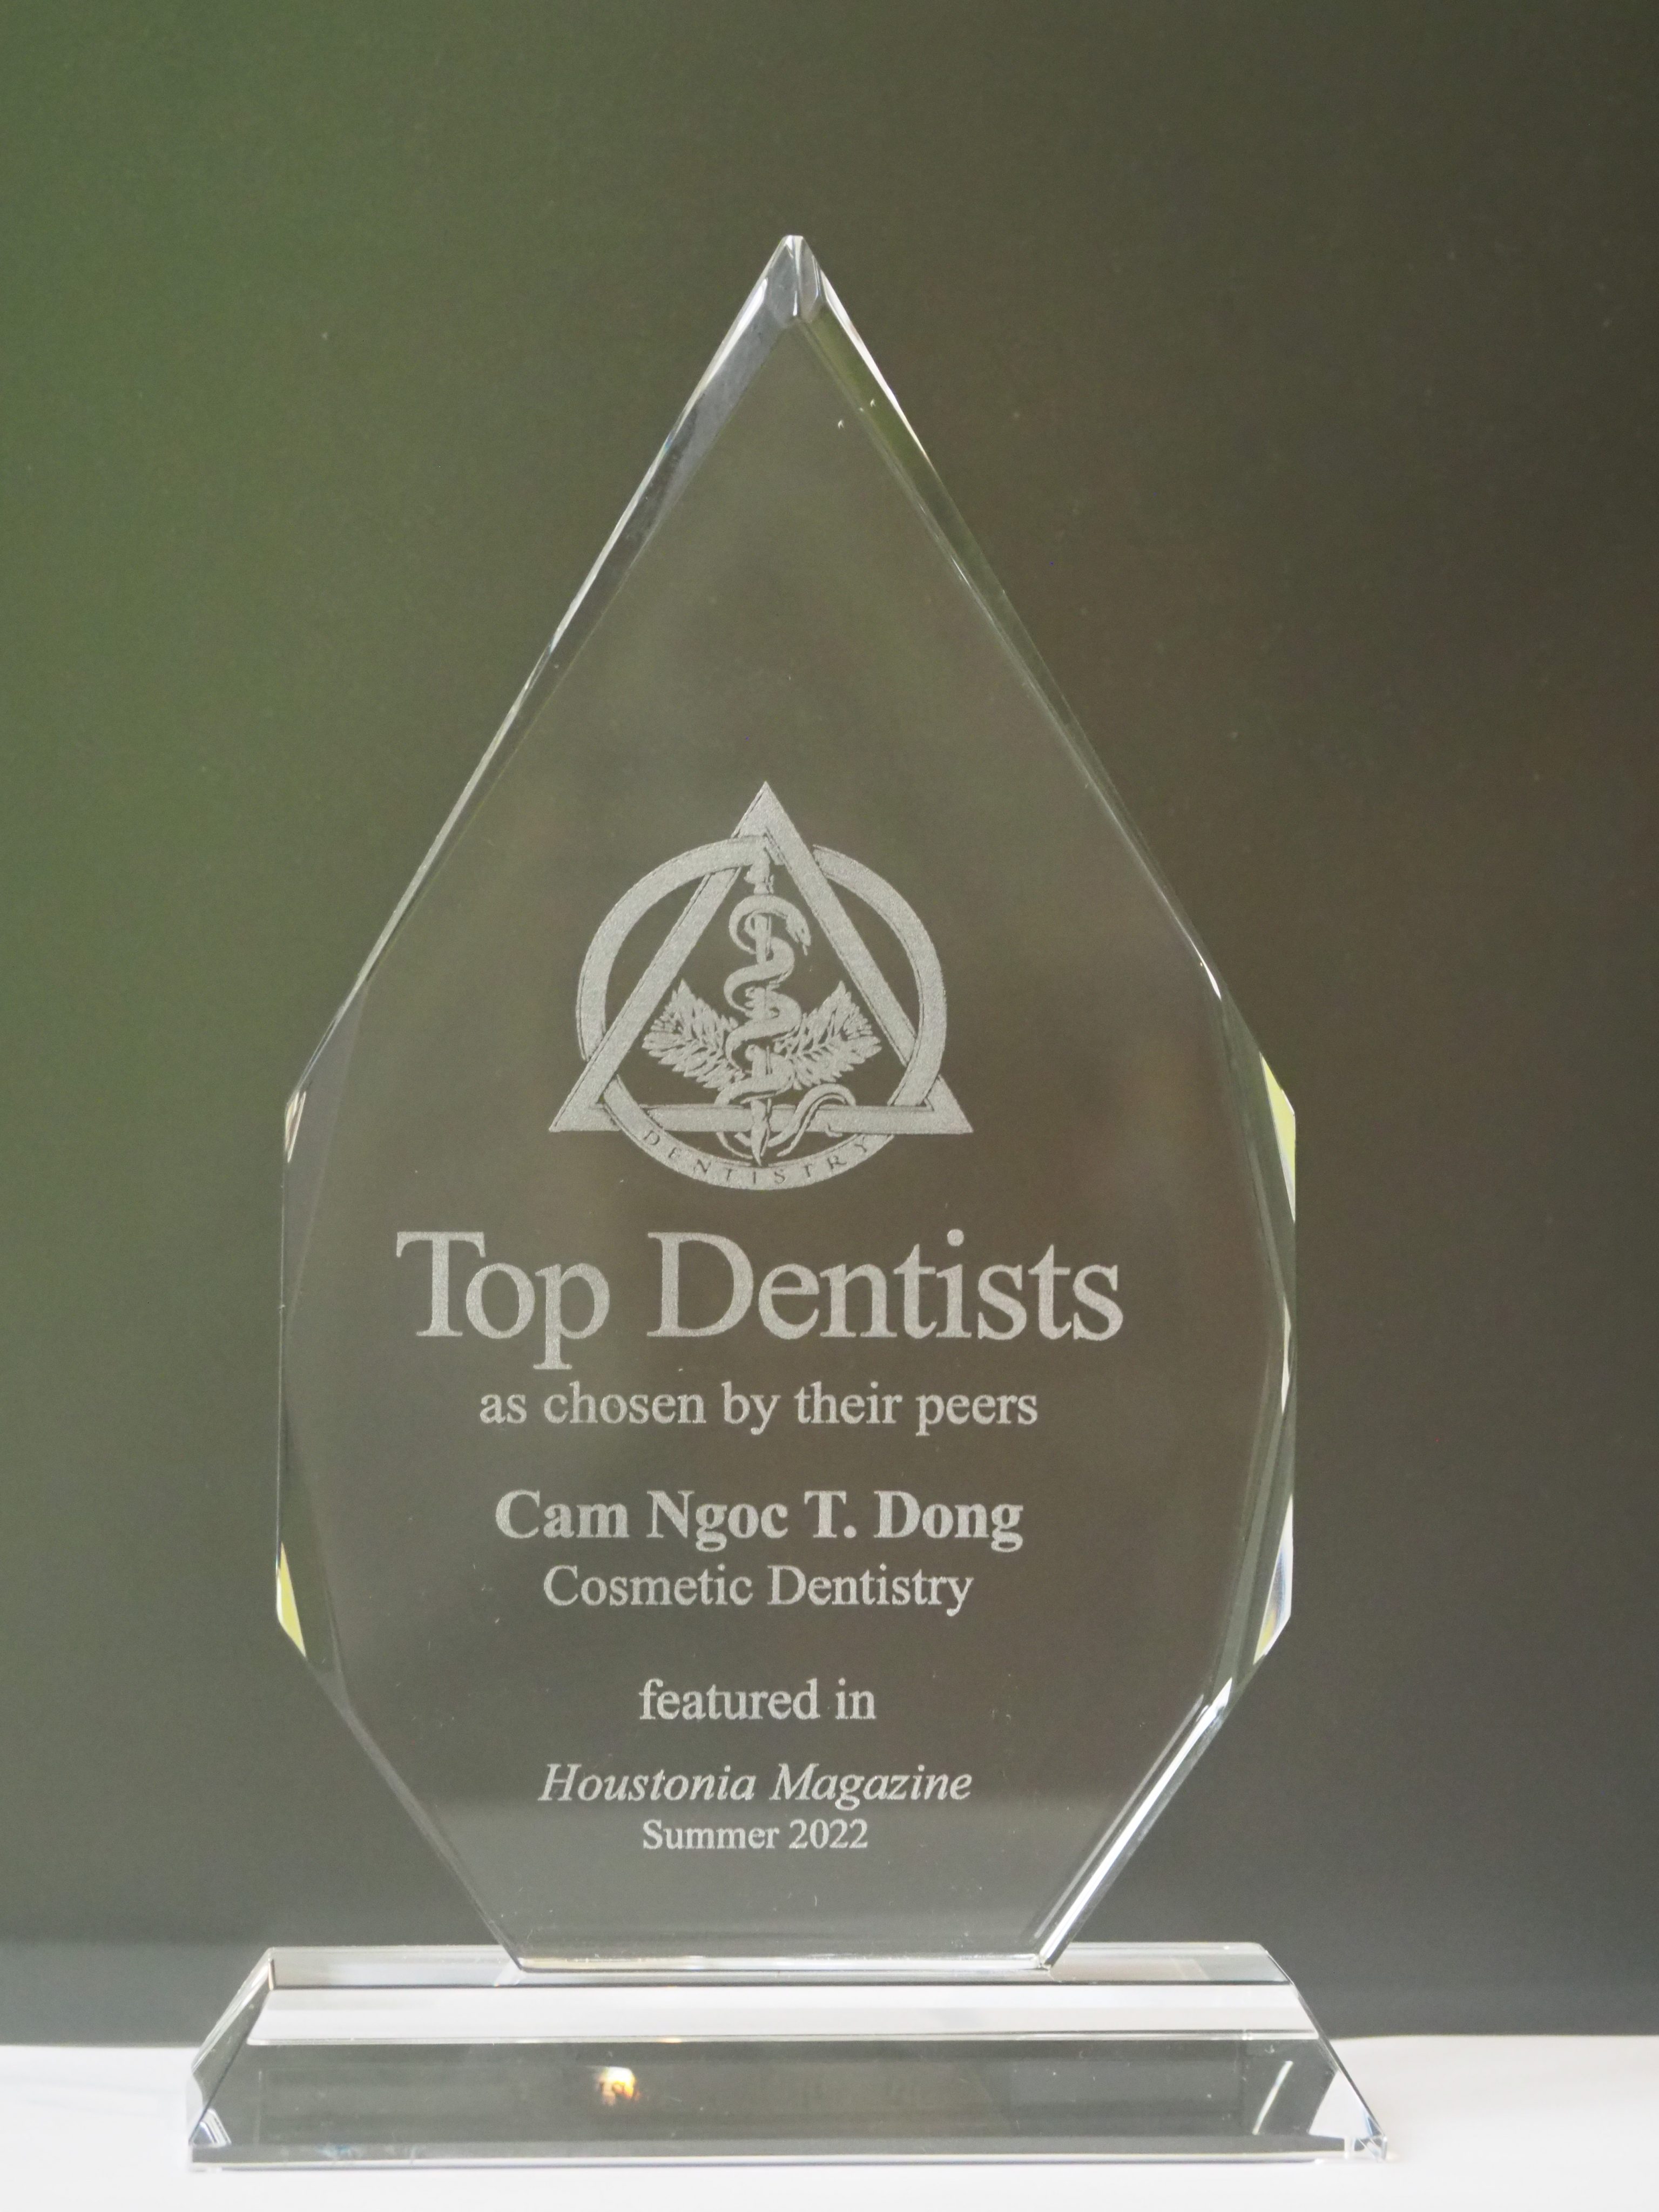 Top Dentists Features in Houston Magazine 2022